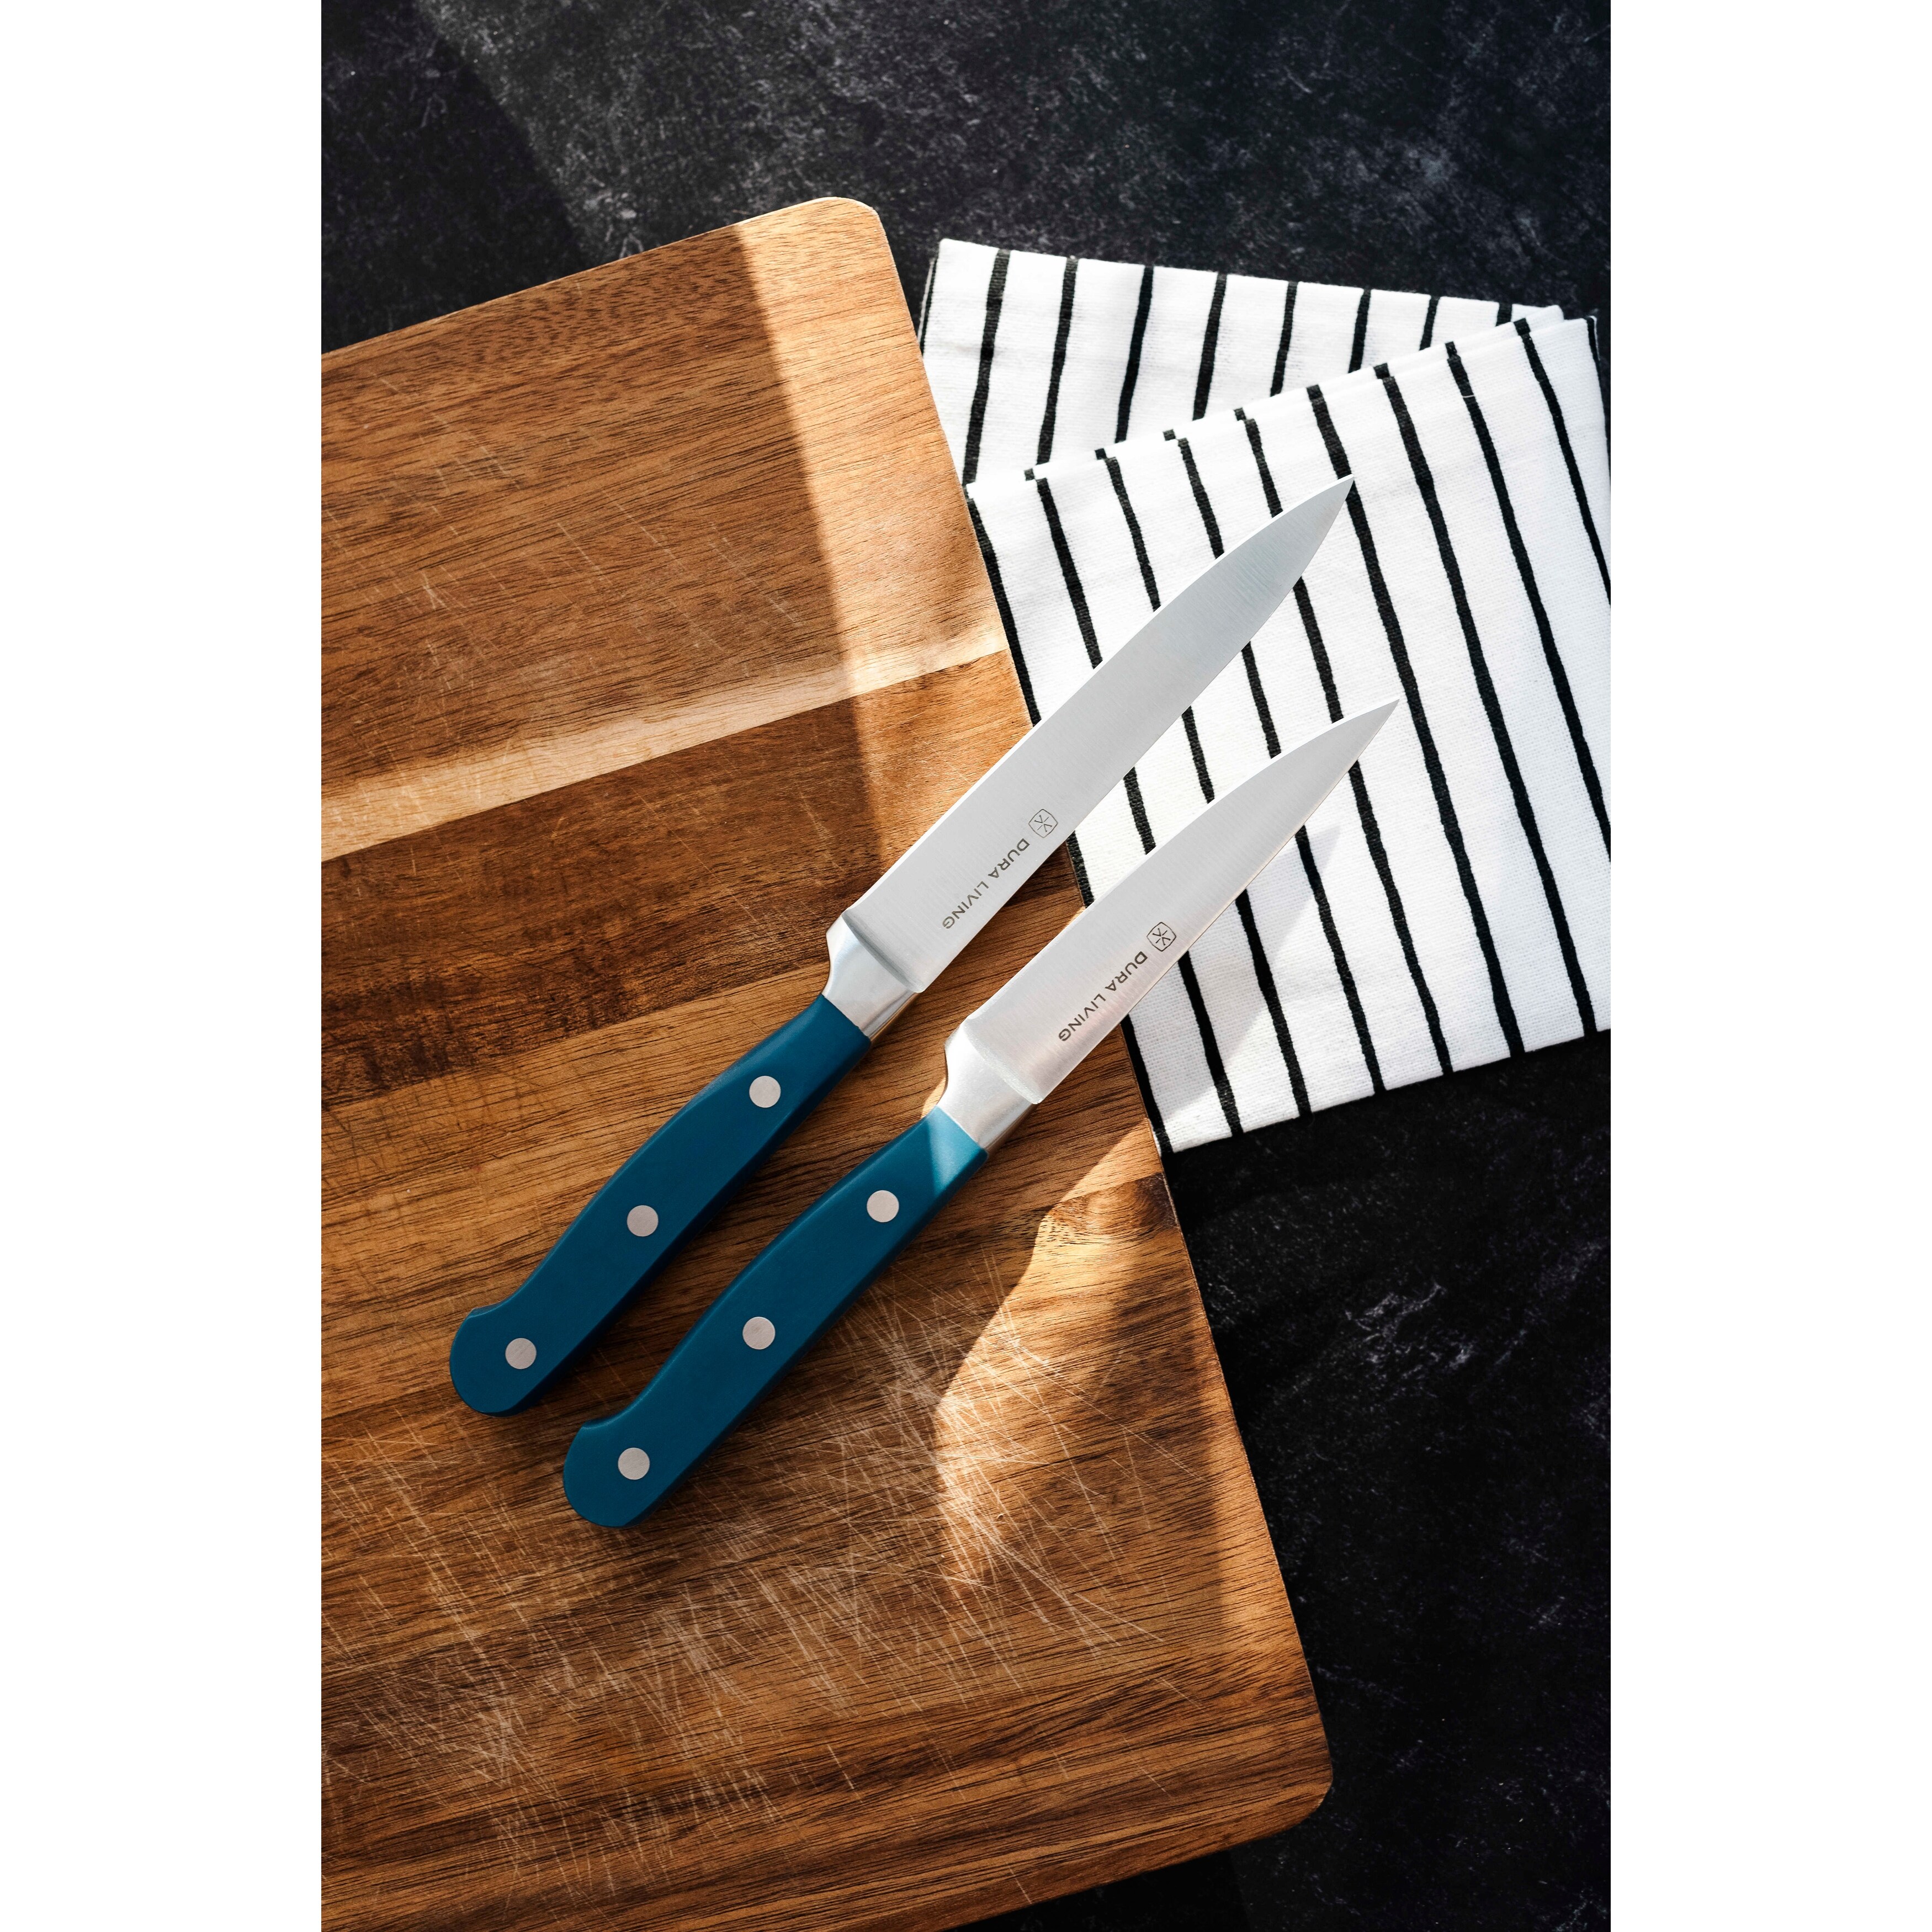 https://ak1.ostkcdn.com/images/products/is/images/direct/d69e1b1f39c47e3d20b6e8841e8f9bb2f5f7636d/Dura-Living-3-Piece-Kitchen-Knife-Set---Superior-Forged-High-Carbon-Stainless-Steel-Ultra-Sharp-Cooking-Knives%2C-Royal-Blue.jpg